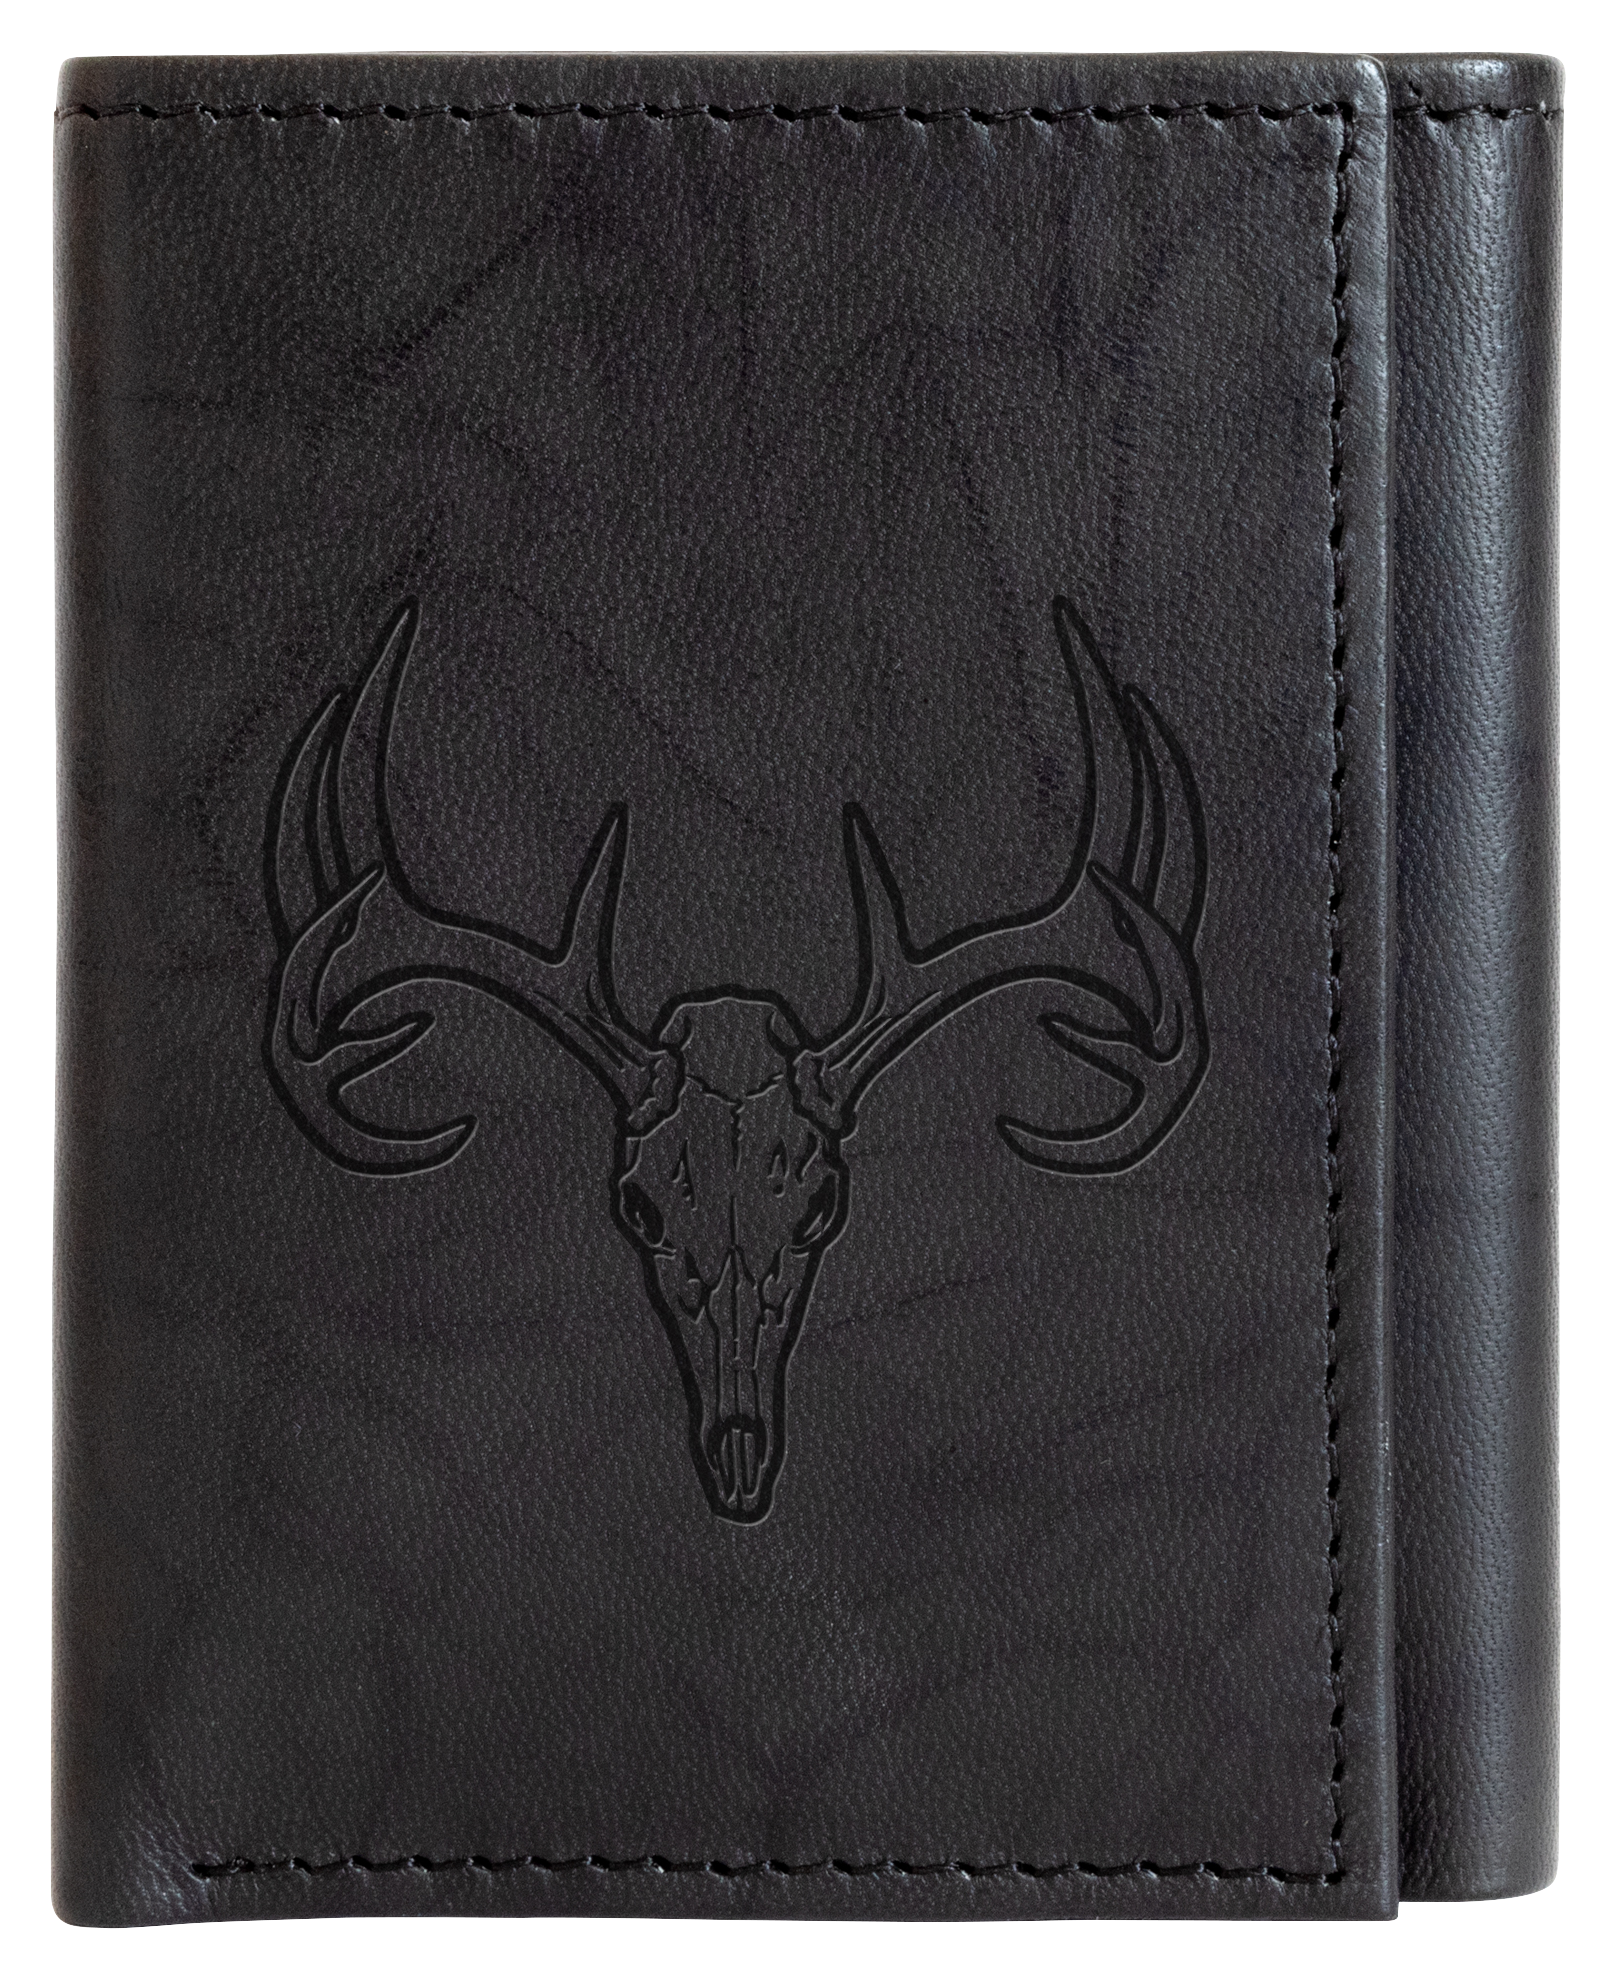 RedHead Skull Leather Trifold Wallet | Cabela's